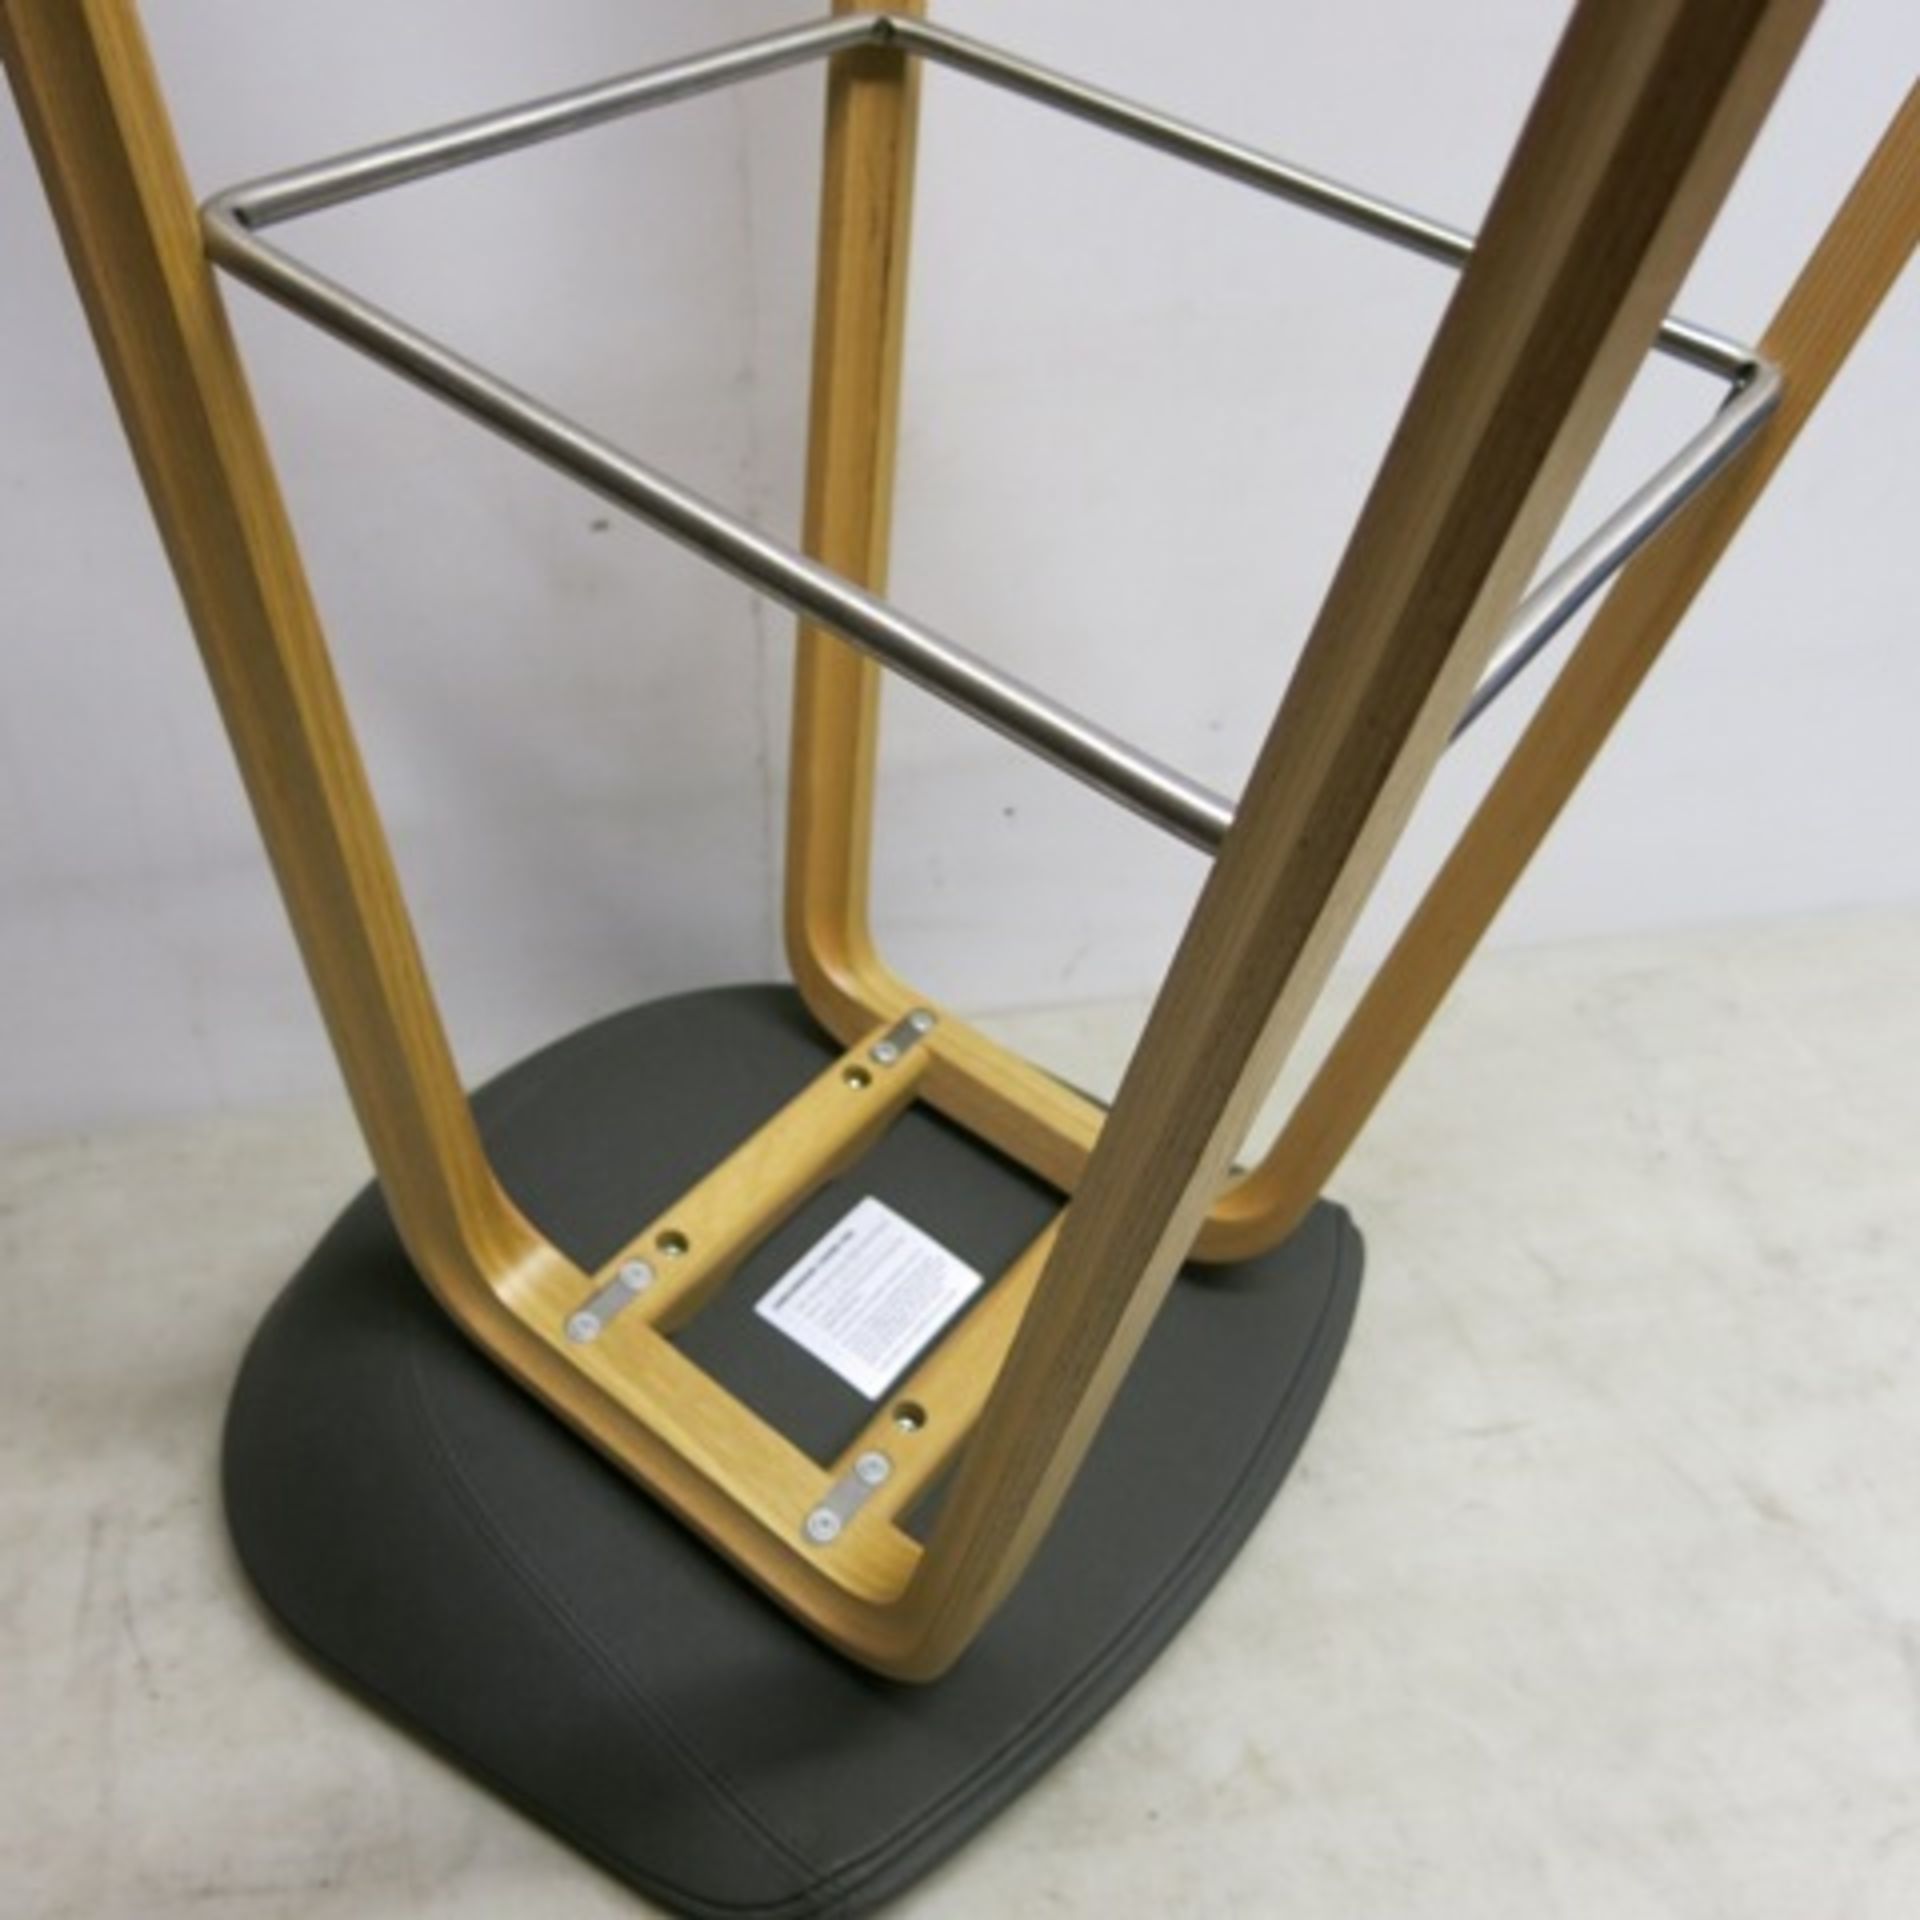 Designer 'Hay' About A Stool Model AAS32 High Stool in Matt Lacquered Oak & Charcoal Grey Padded - Image 4 of 5